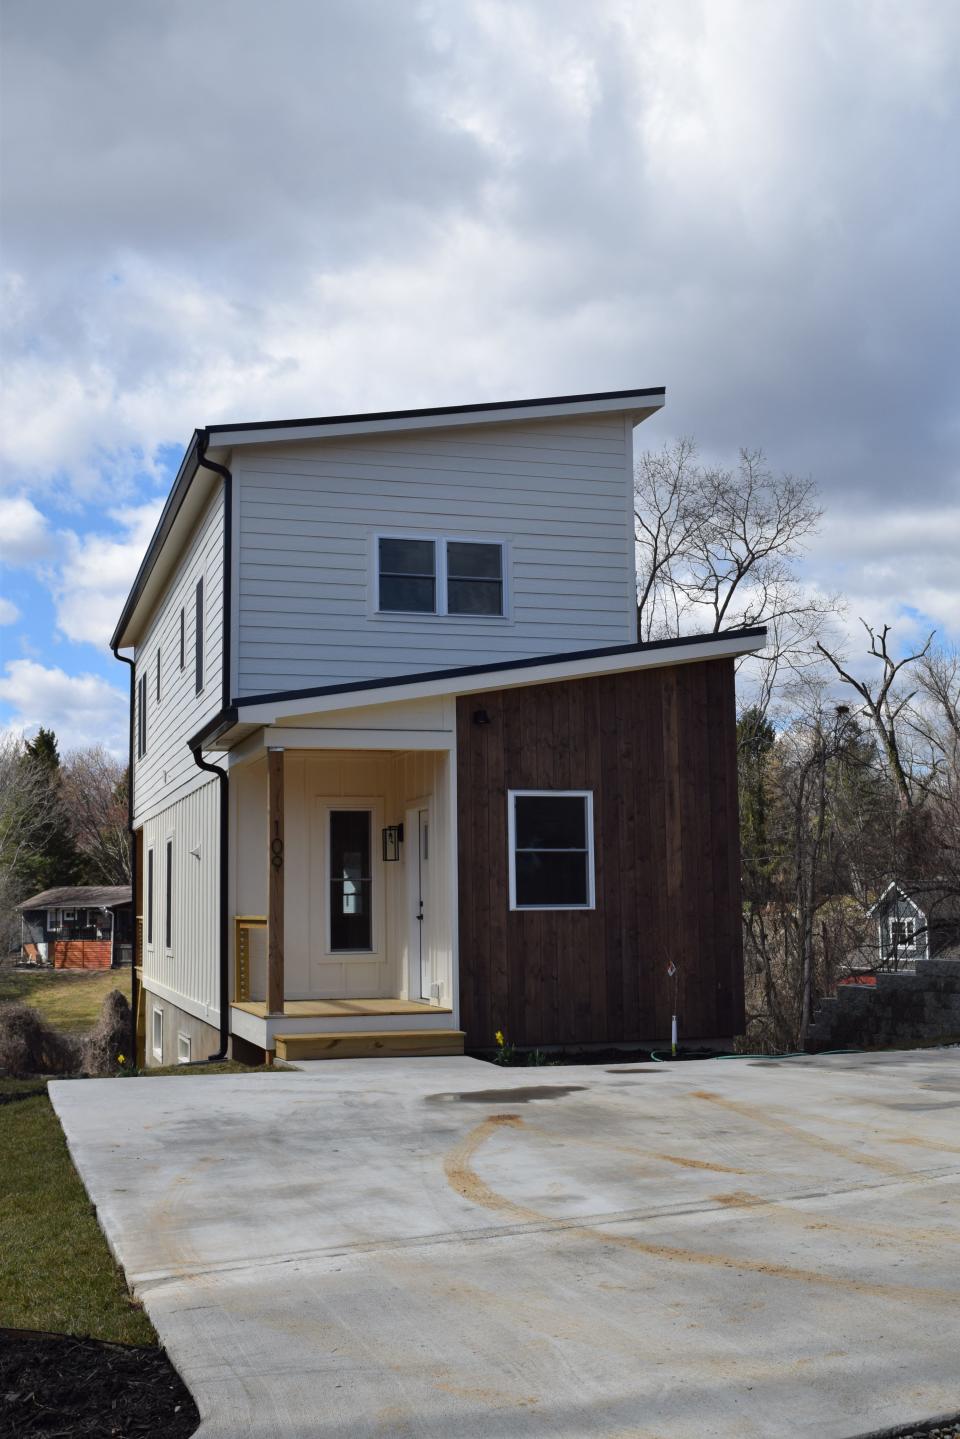 Two single-family units have been built in place of the original 101 Arline Henry affordable housing project. They both have attached homestay units, which are often listed on Airbnb or Vrbo. Feb. 23, 2024.